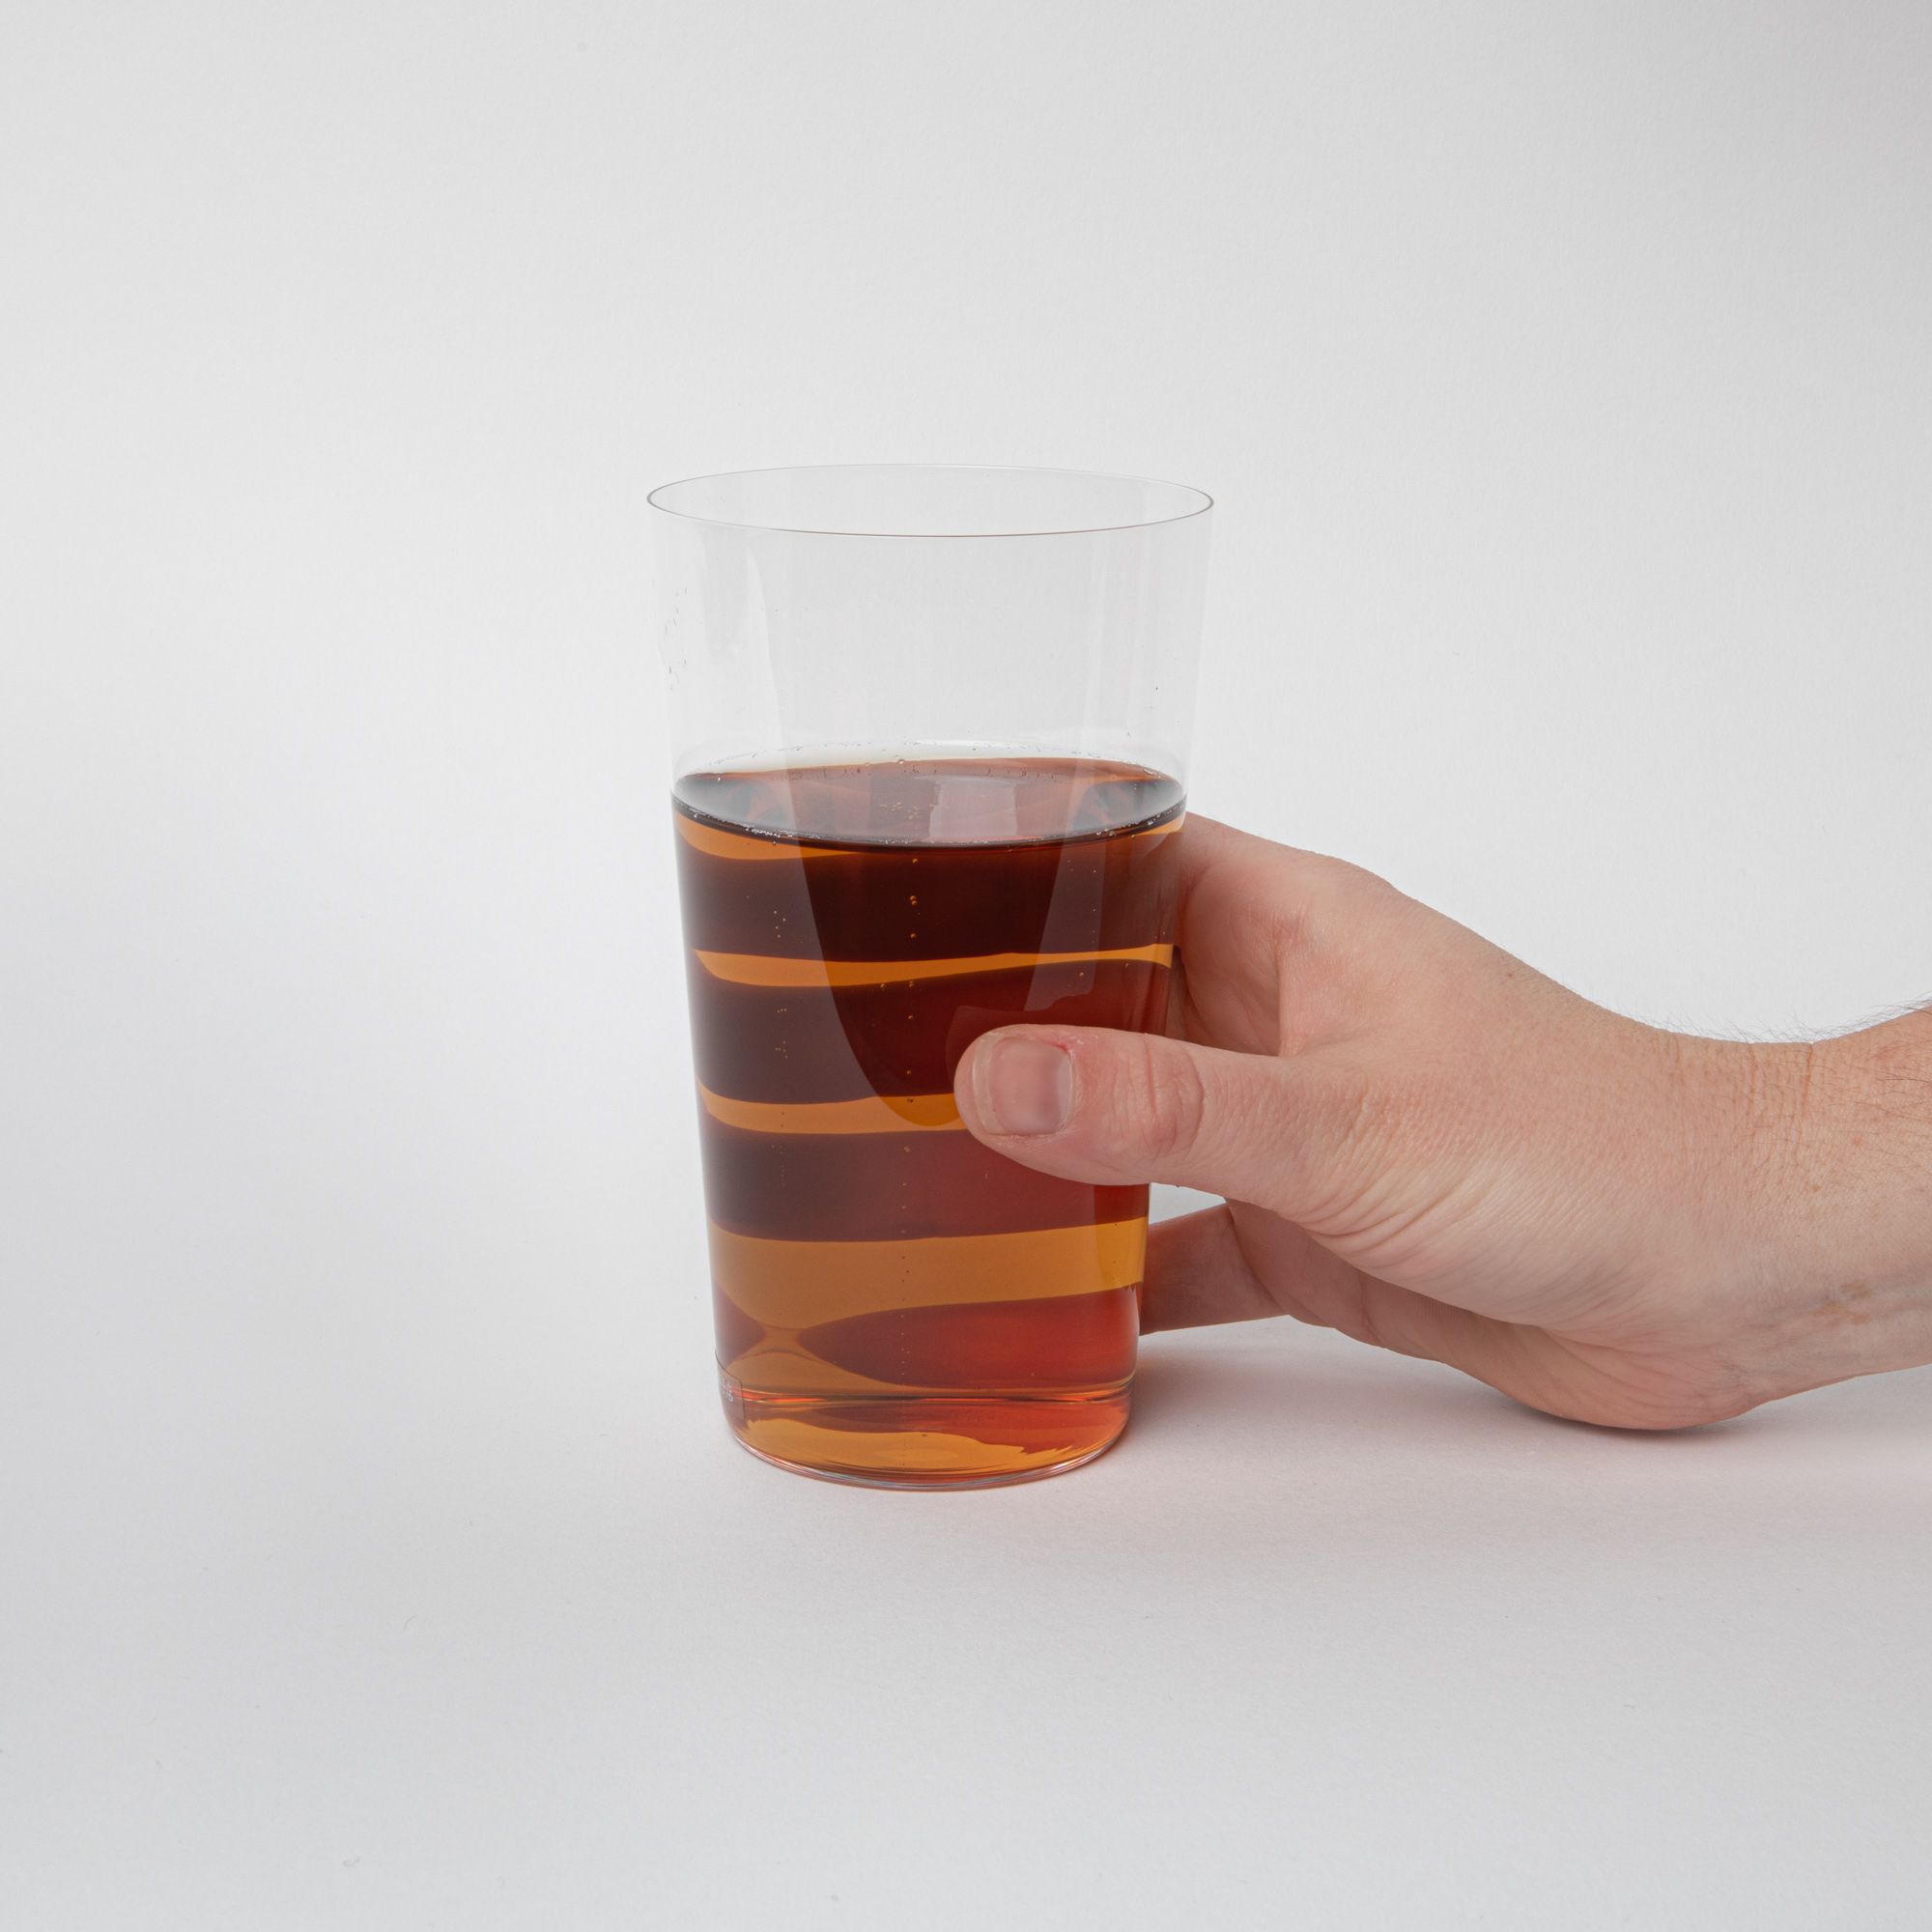 A hand holding a clear simple beer glass filled with beer